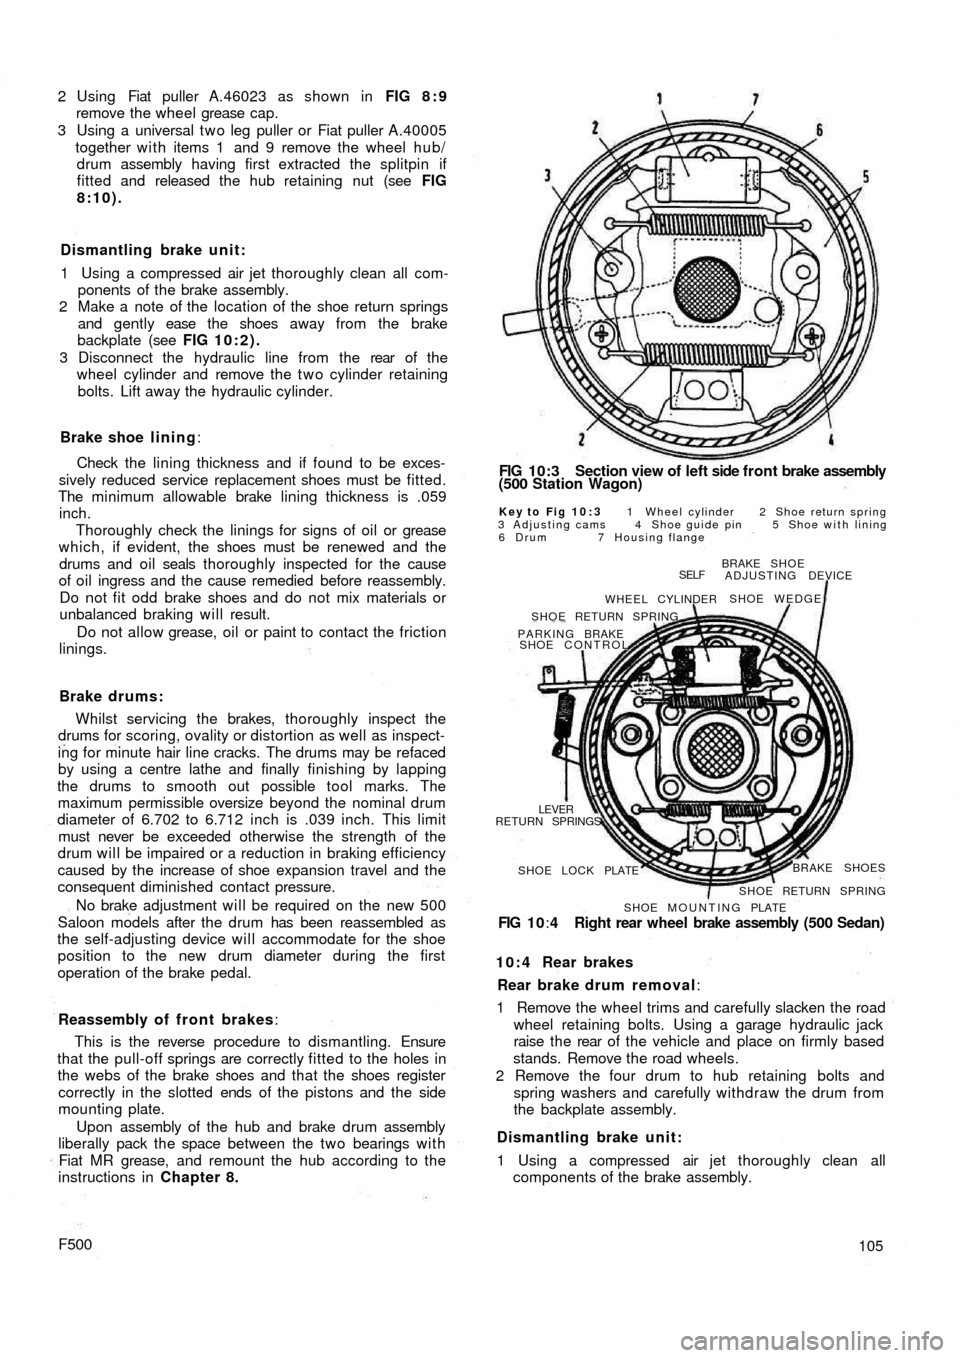 FIAT 500 1964 1.G Workshop Manual 2 Using  Fiat puller A.46023 as shown in FIG 8 : 9
remove the wheel grease cap.
3 Using a universal t w o leg puller or Fiat puller A.40005
together w i t h items 1  and 9 remove the wheel hub/
drum a